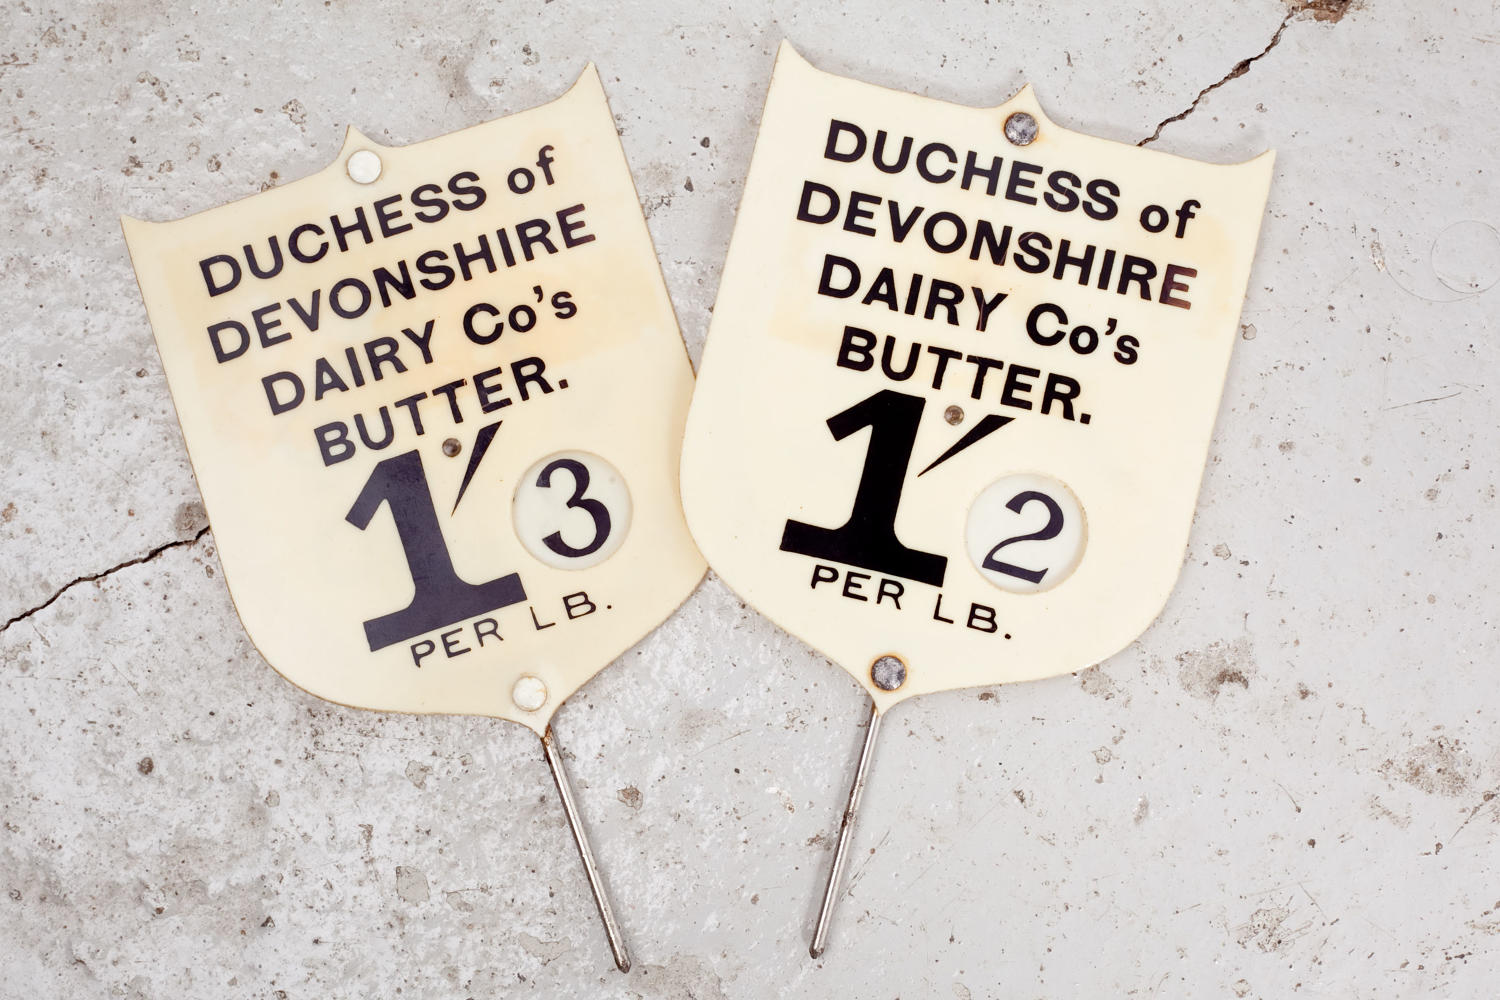 Duchess of Devonshire Dairy Co's Butter adjustable price labels